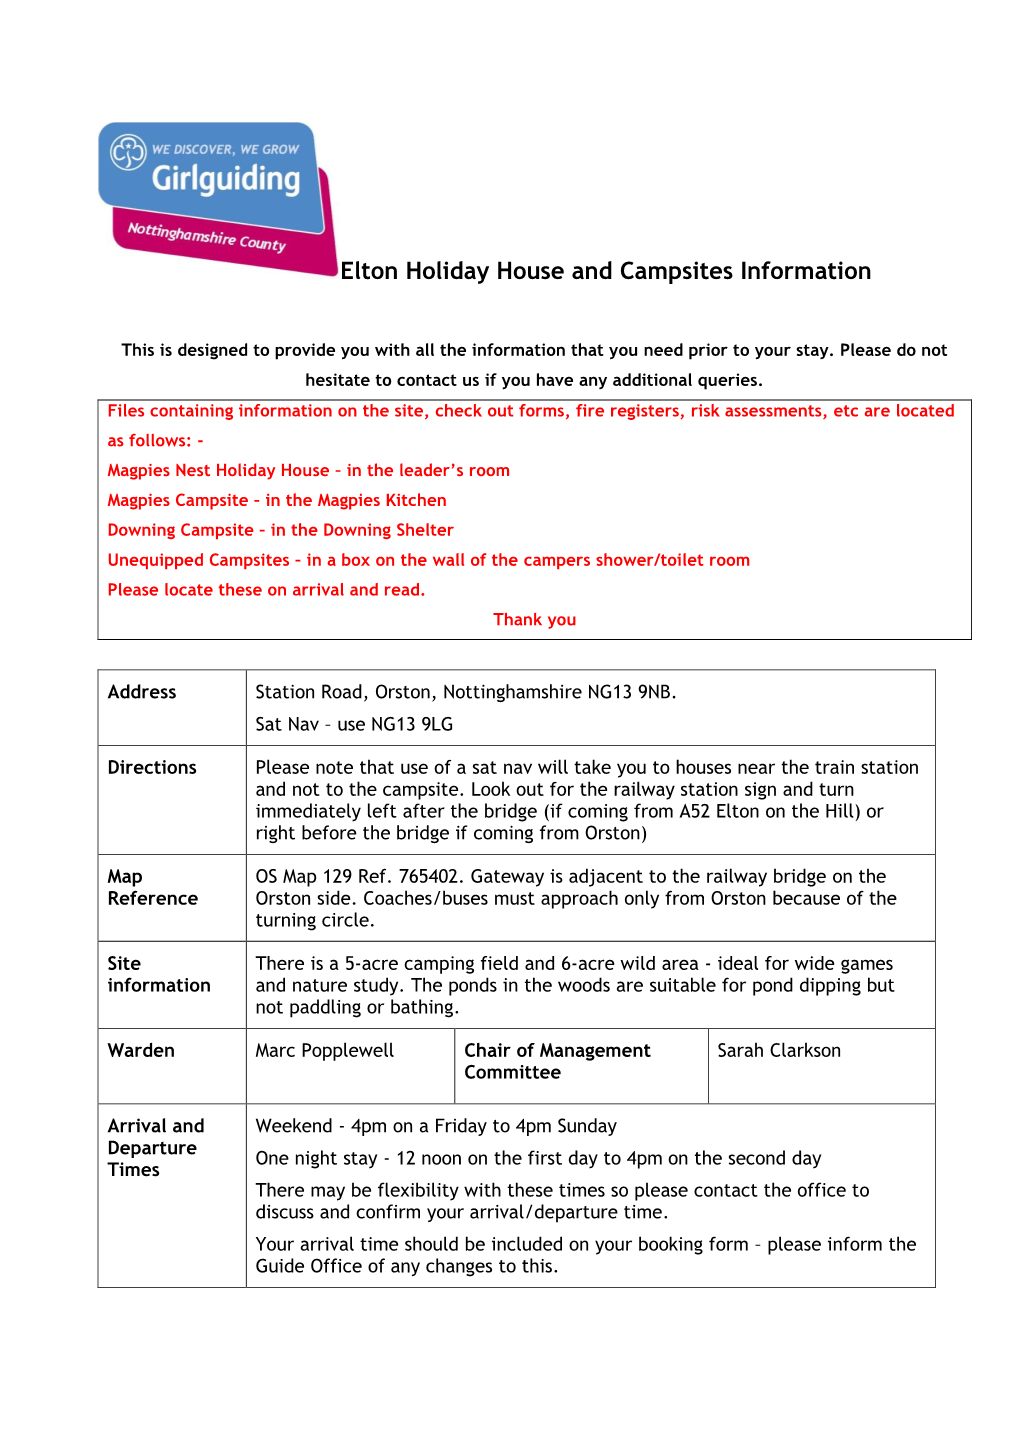 Download Elton Holiday House and Campsites Information Jan 2020